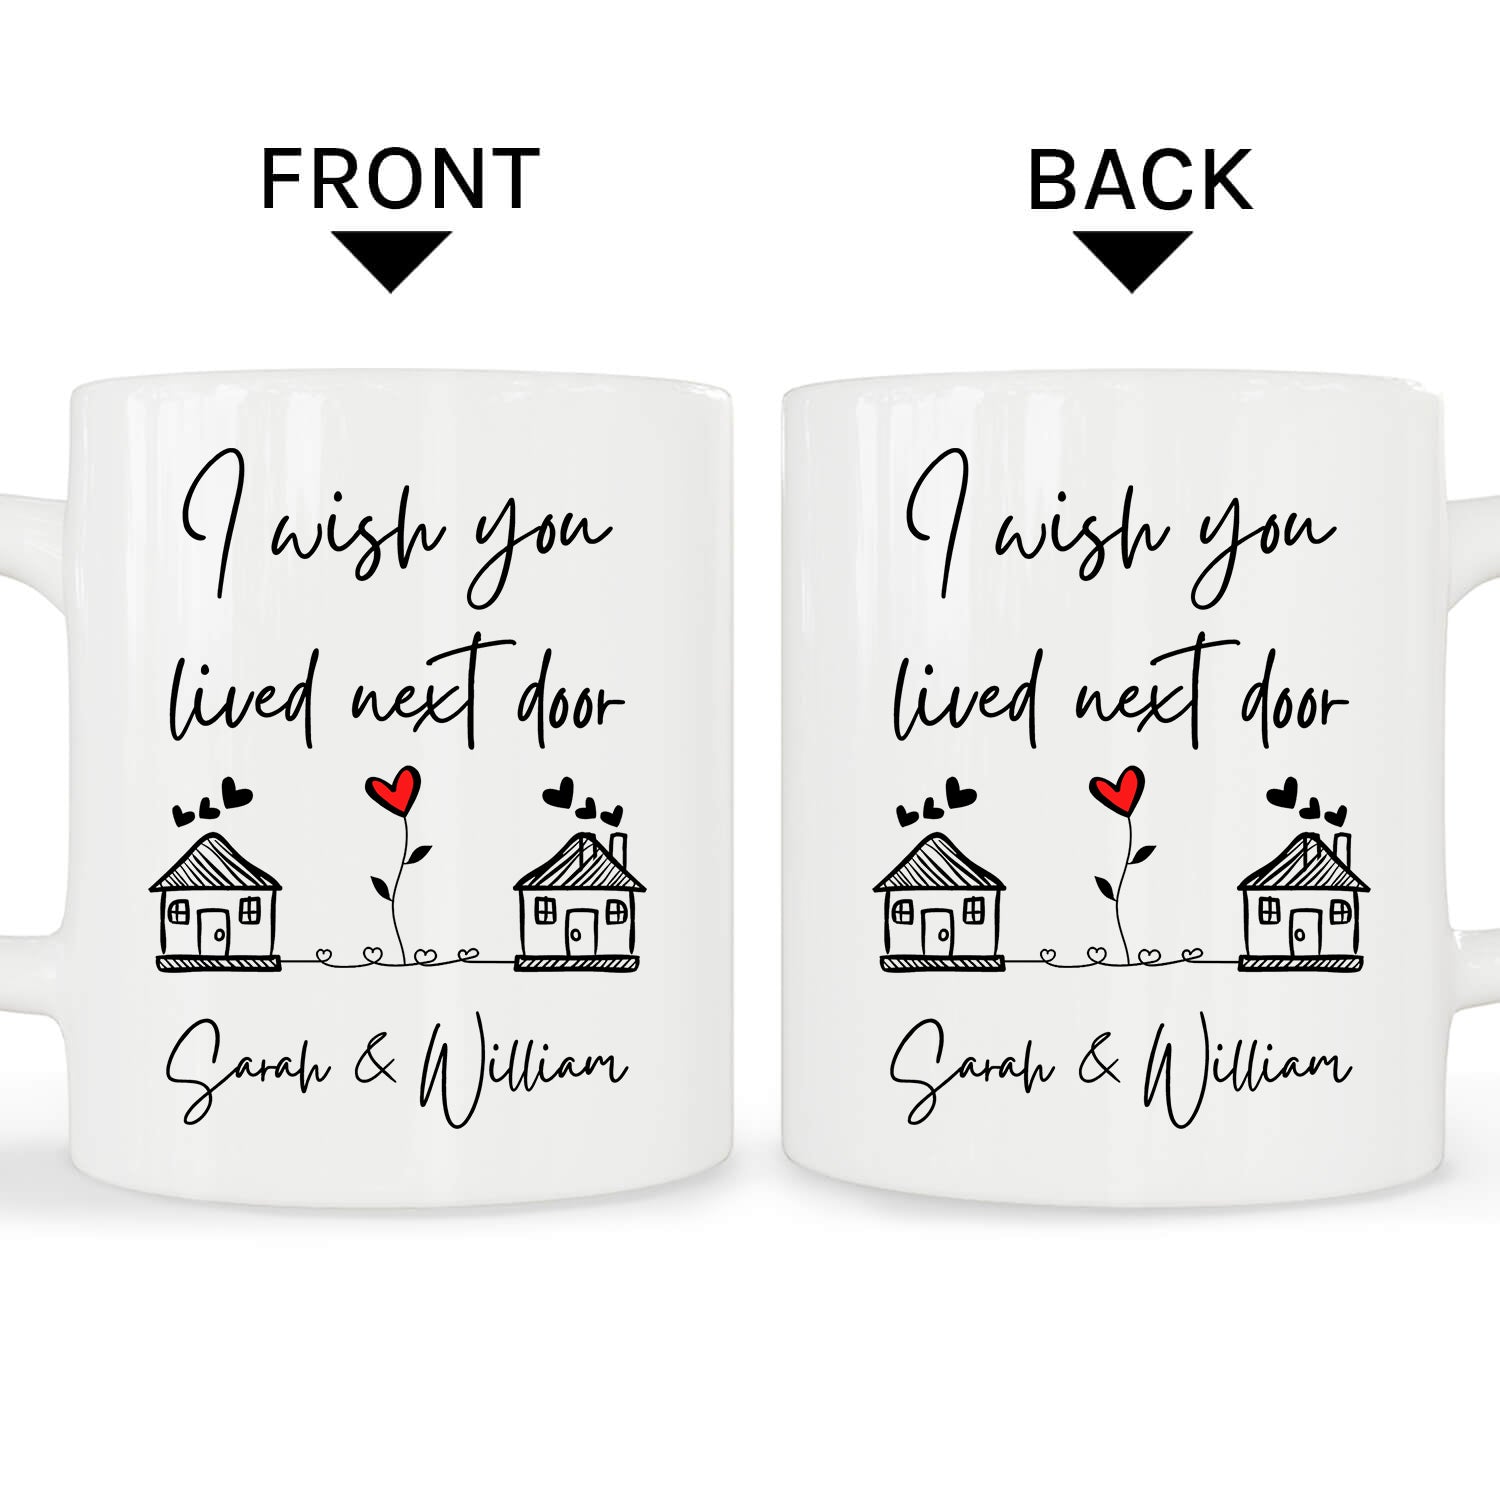 I Wish You Lived Next Door - Personalized Anniversary gift